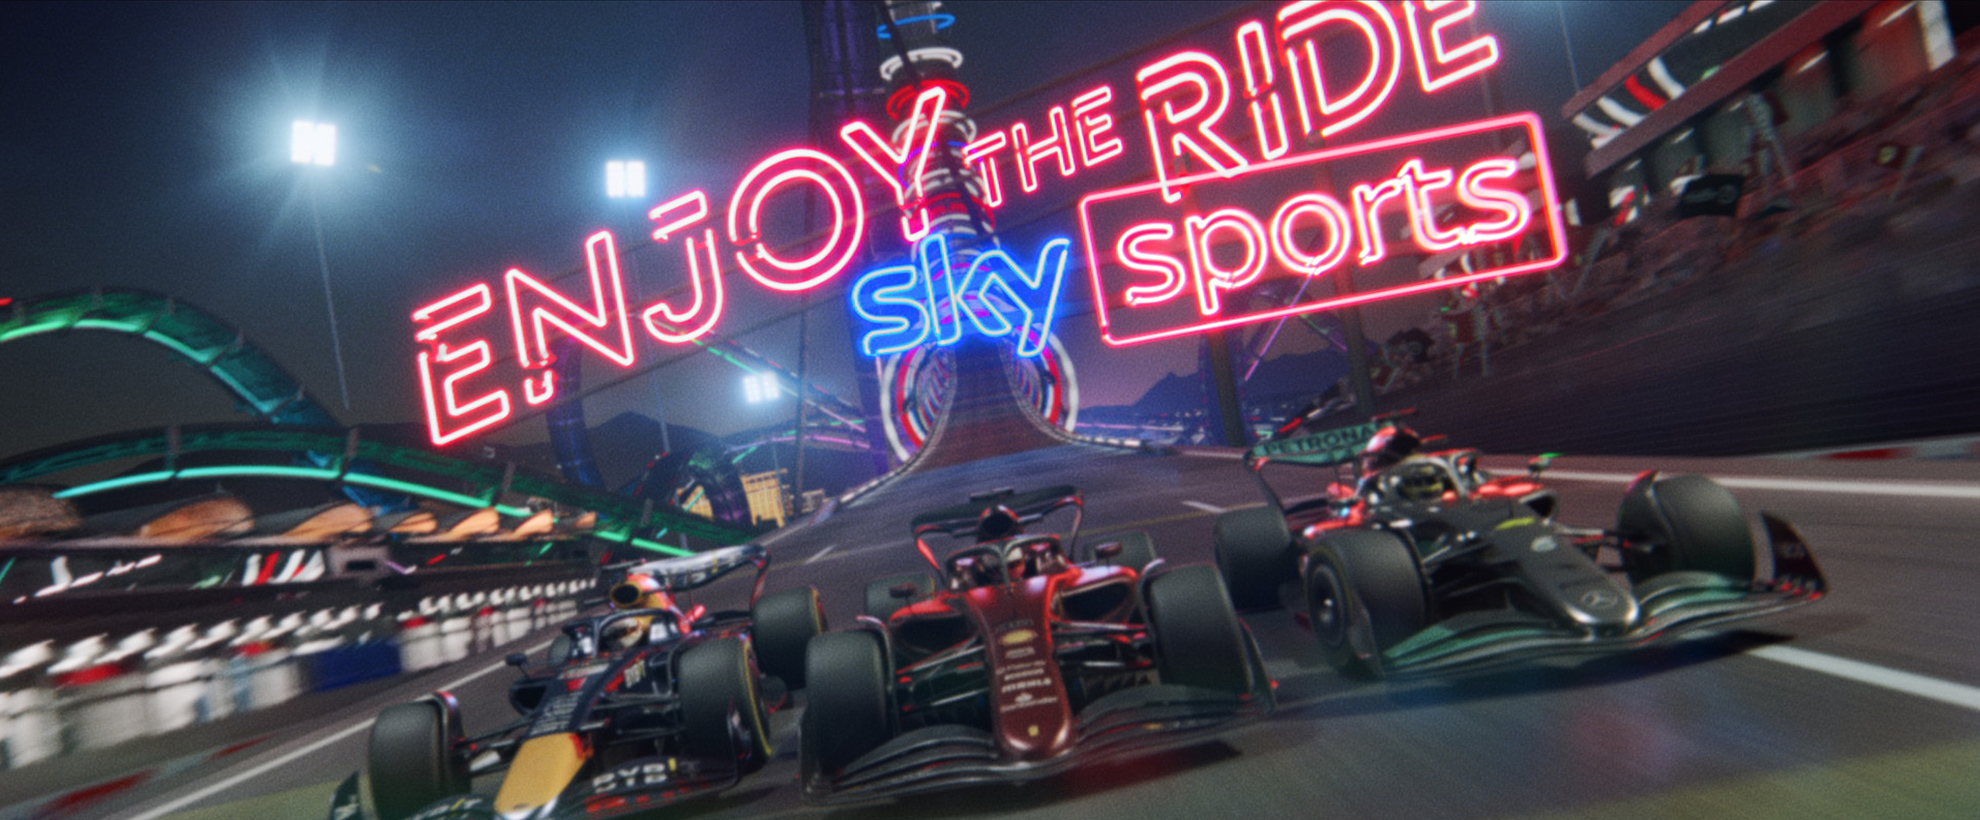 Three F1 cars on a track, in the background "enjoy the ride, sky sports" in neon lettering